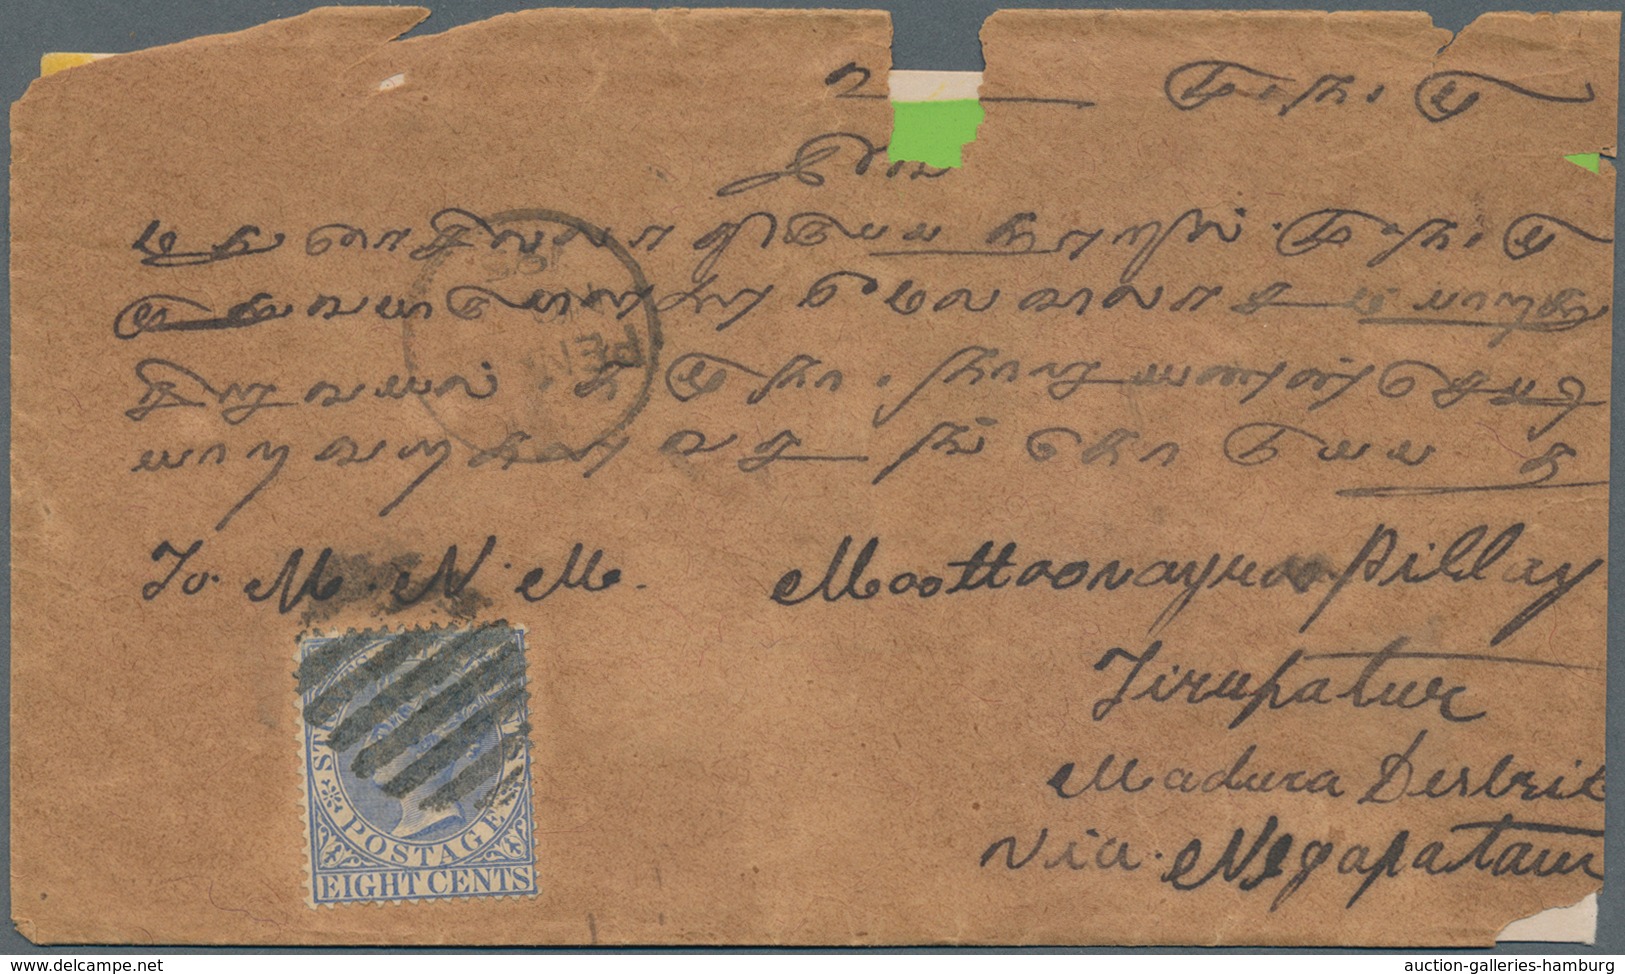 Malaiische Staaten: 1880's-1950's ca.: More than 500 covers, postcards and postal stationery items f